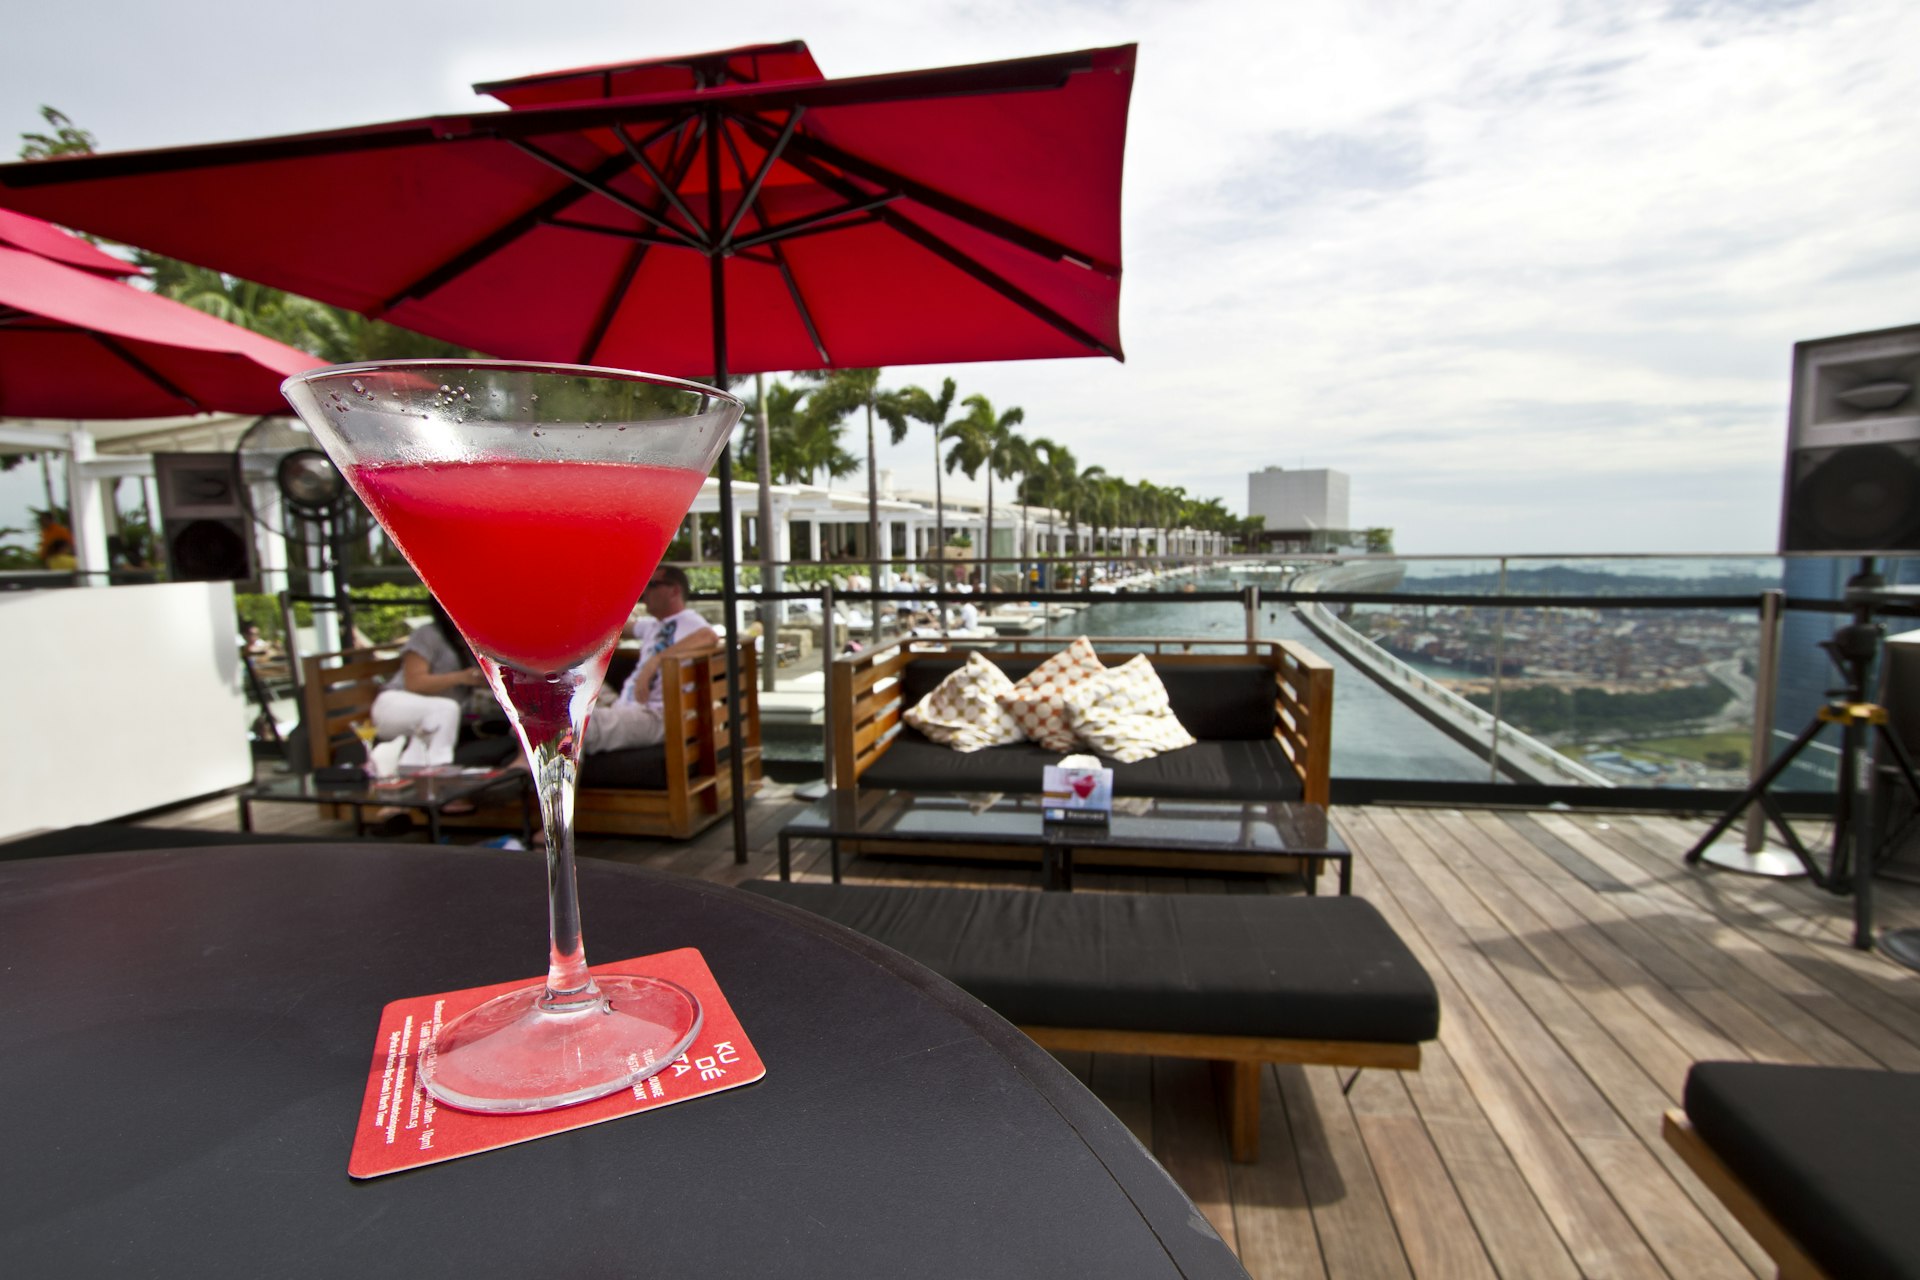 A cocktail glass on a table with a view of a decked rooftop, pool and city in the distance © Kylie McLaughlin / Getty Images